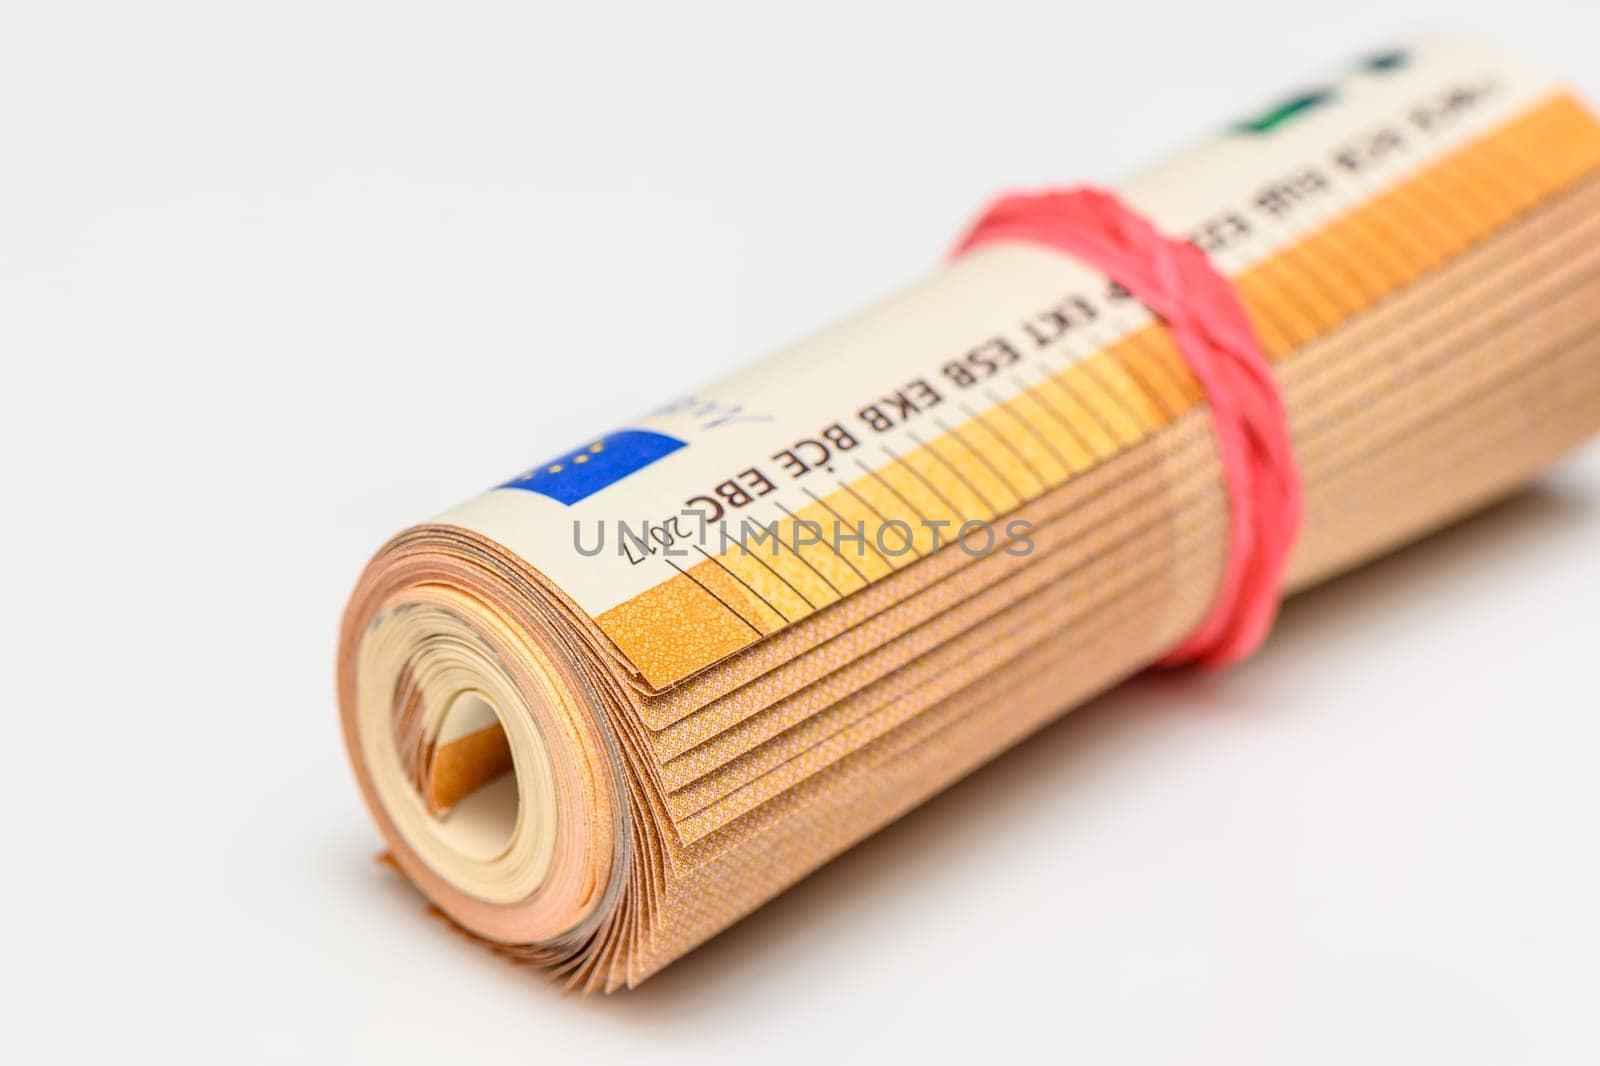 50 euro bills on white background rolled into a tube by Mixa74